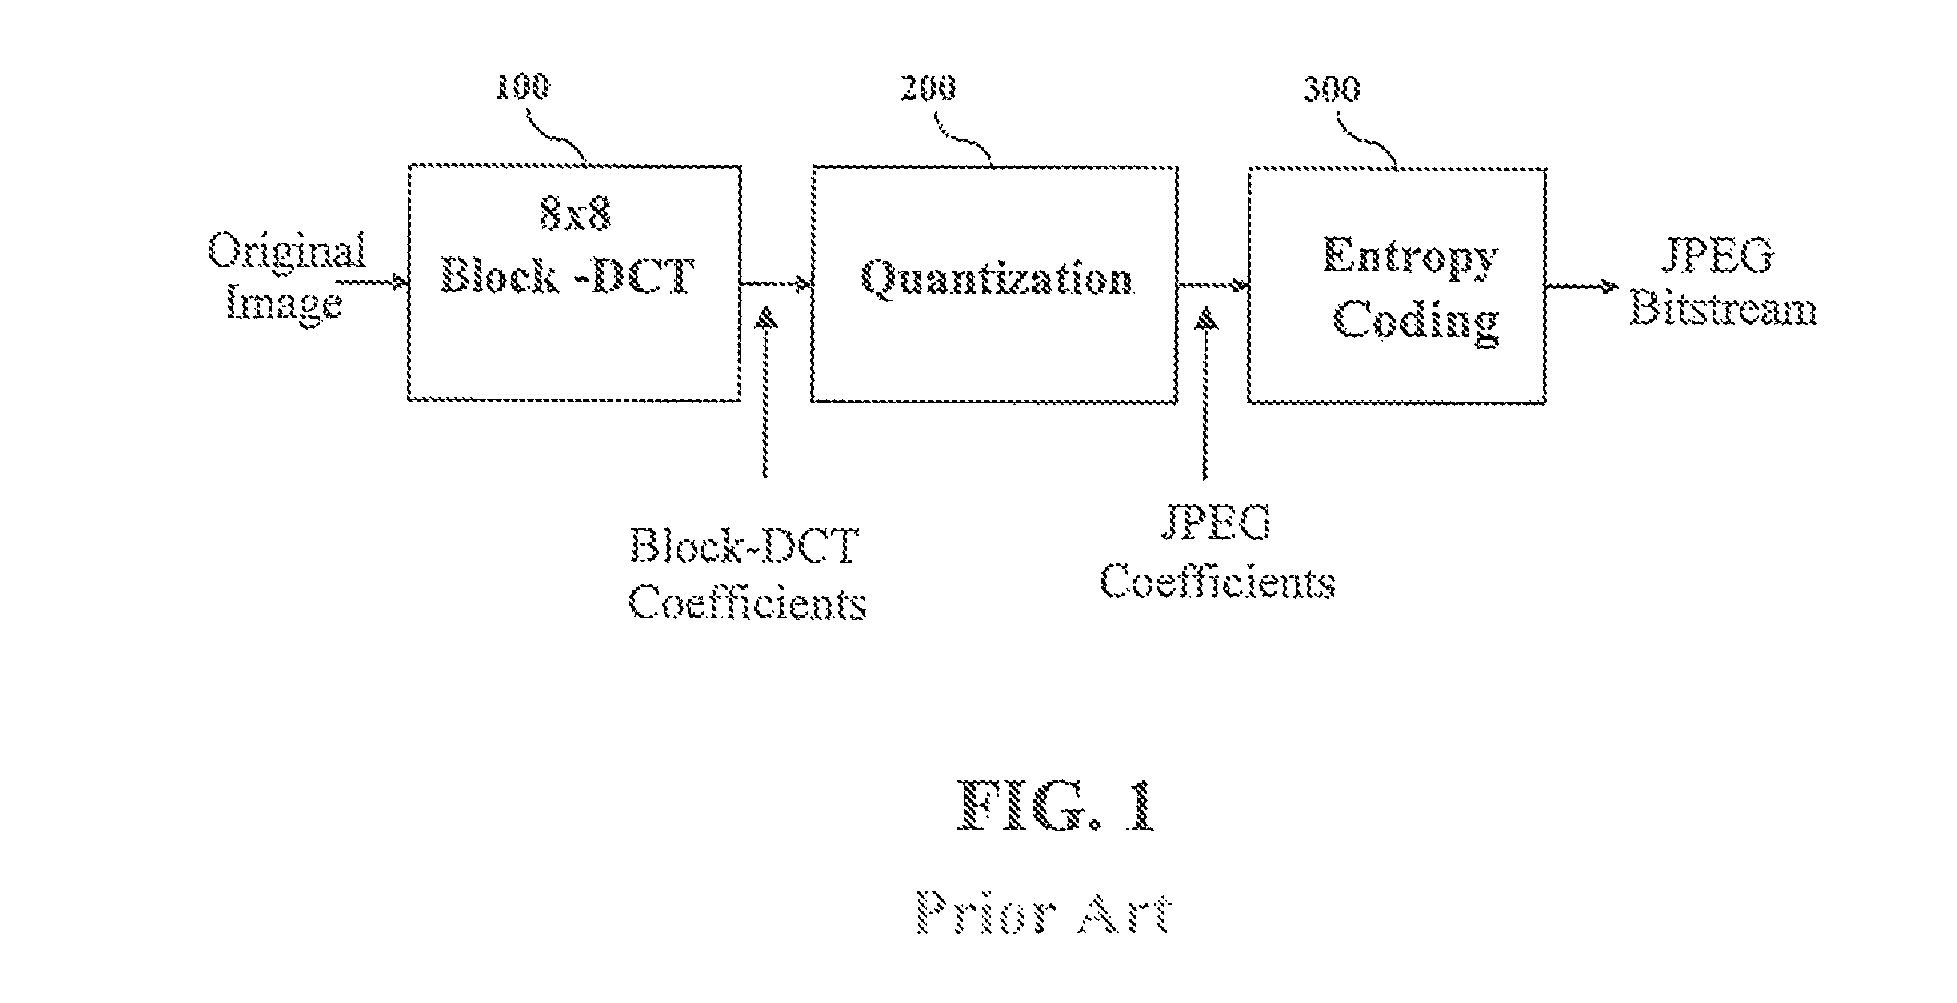 Apparatus and method for a generalized benford's law analysis of DCT and JPEG coefficients